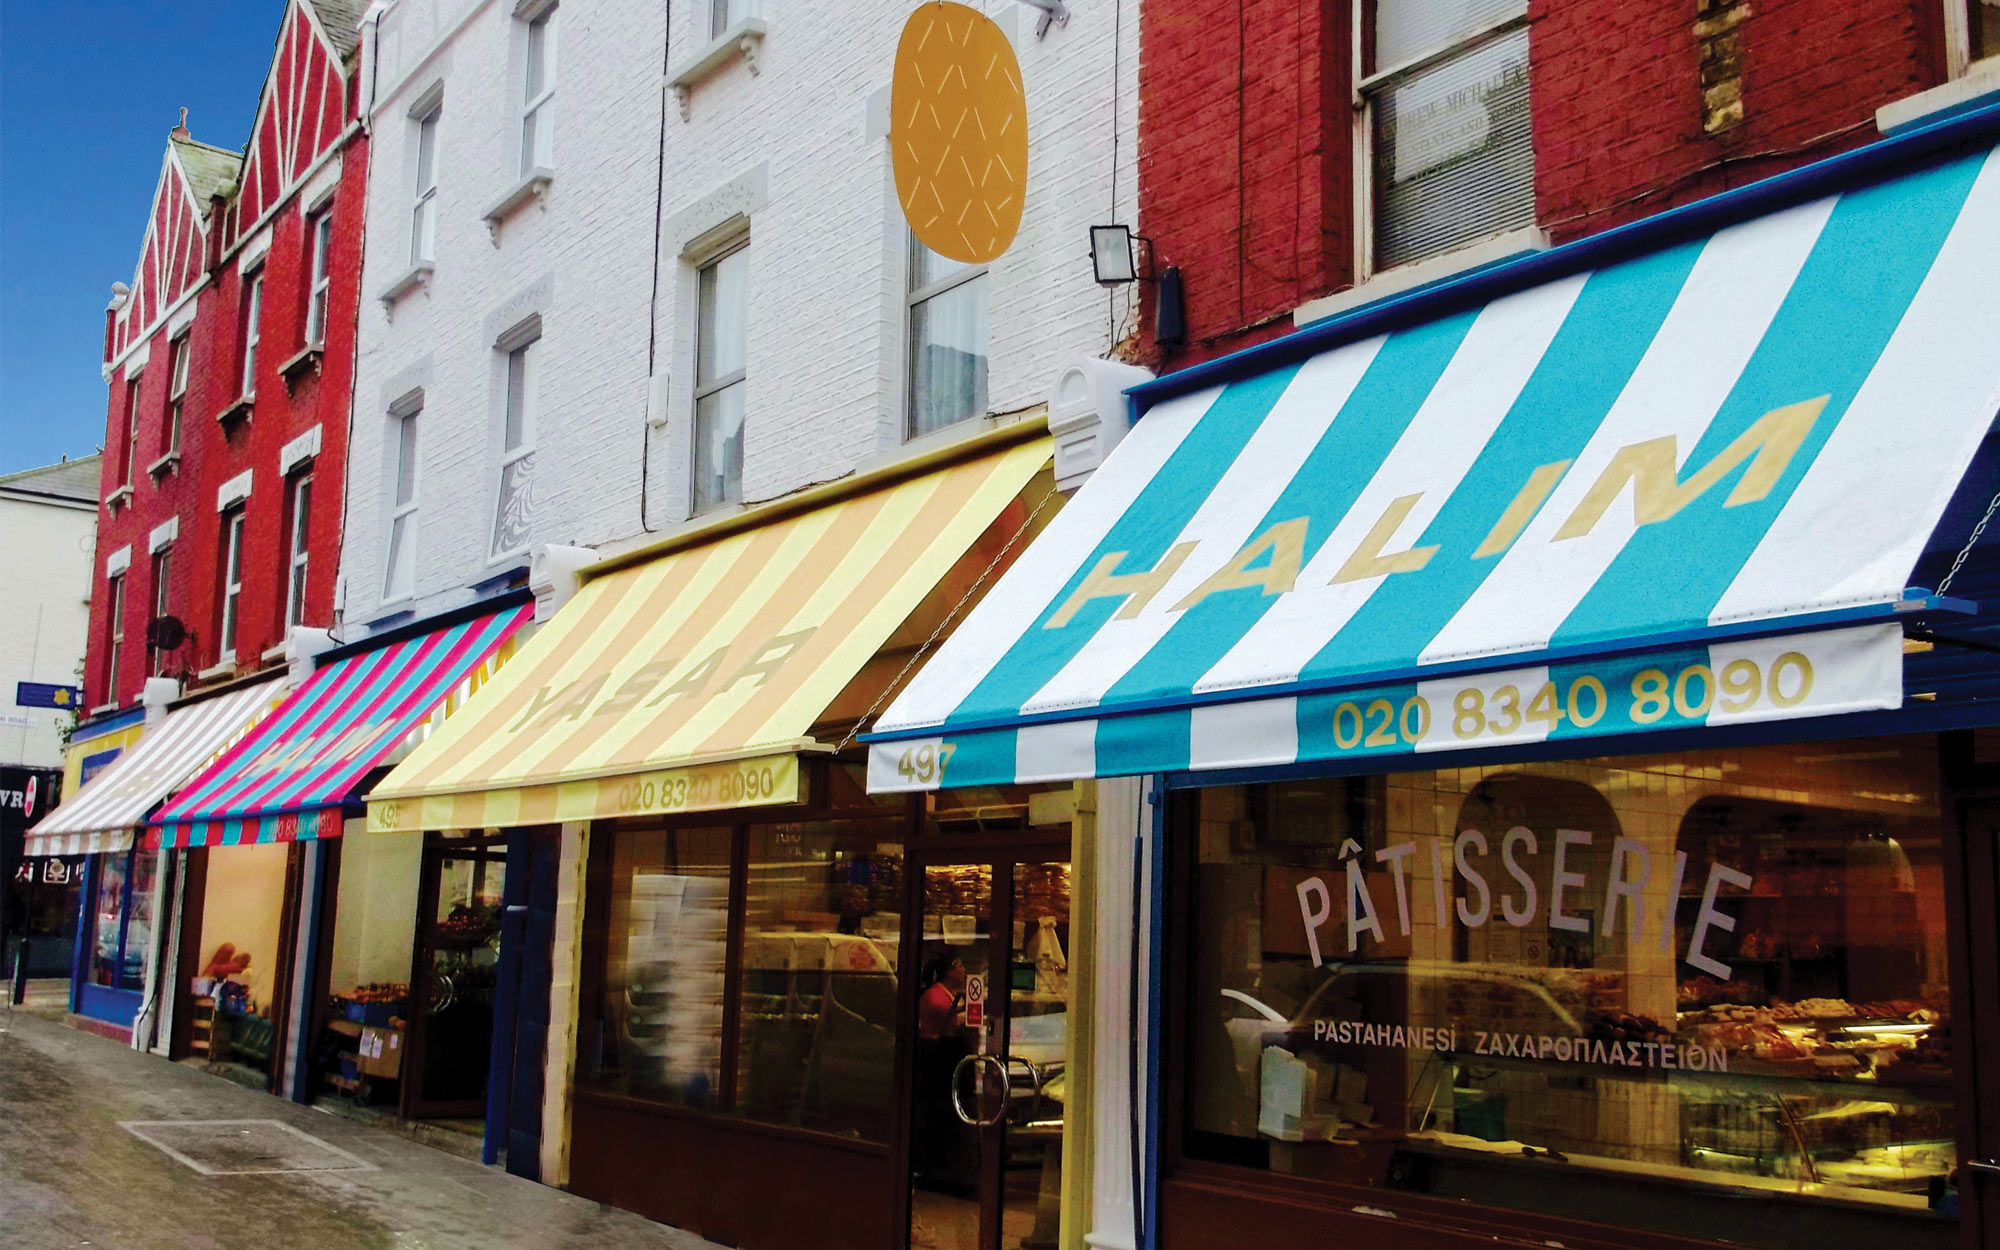 Commercial Awnings with colorful fabric stripes 